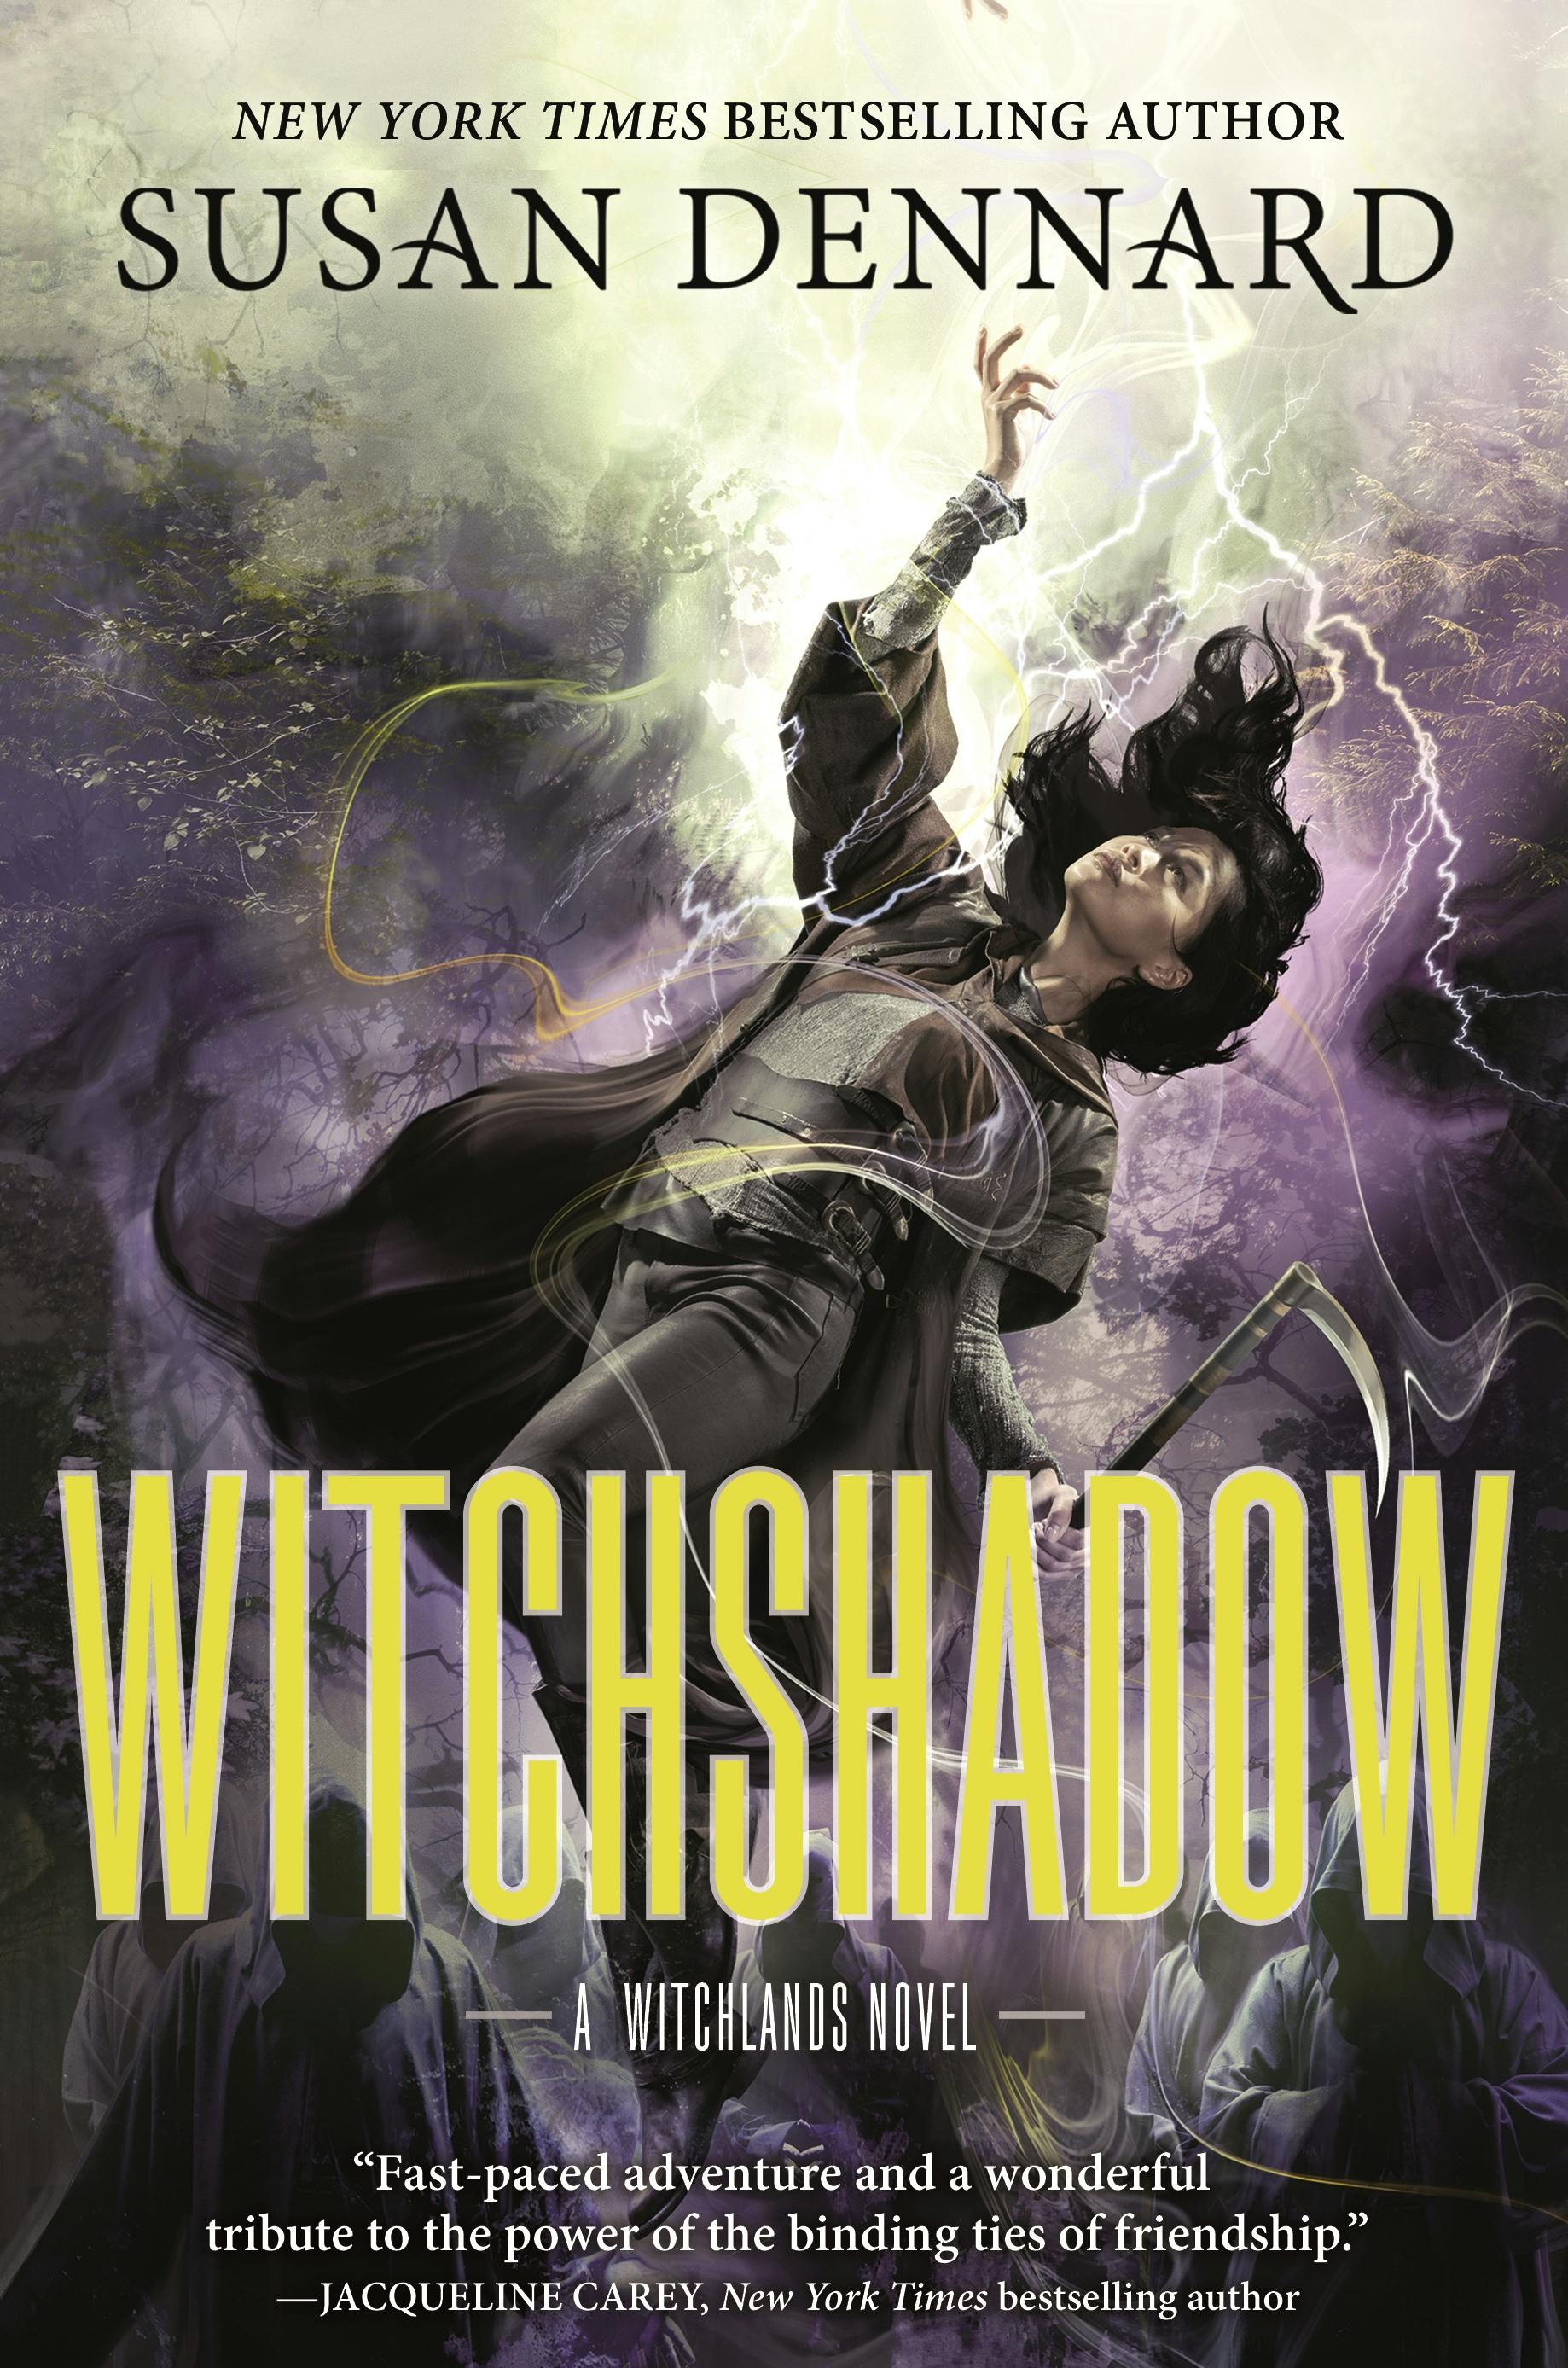 Image of Witchshadow